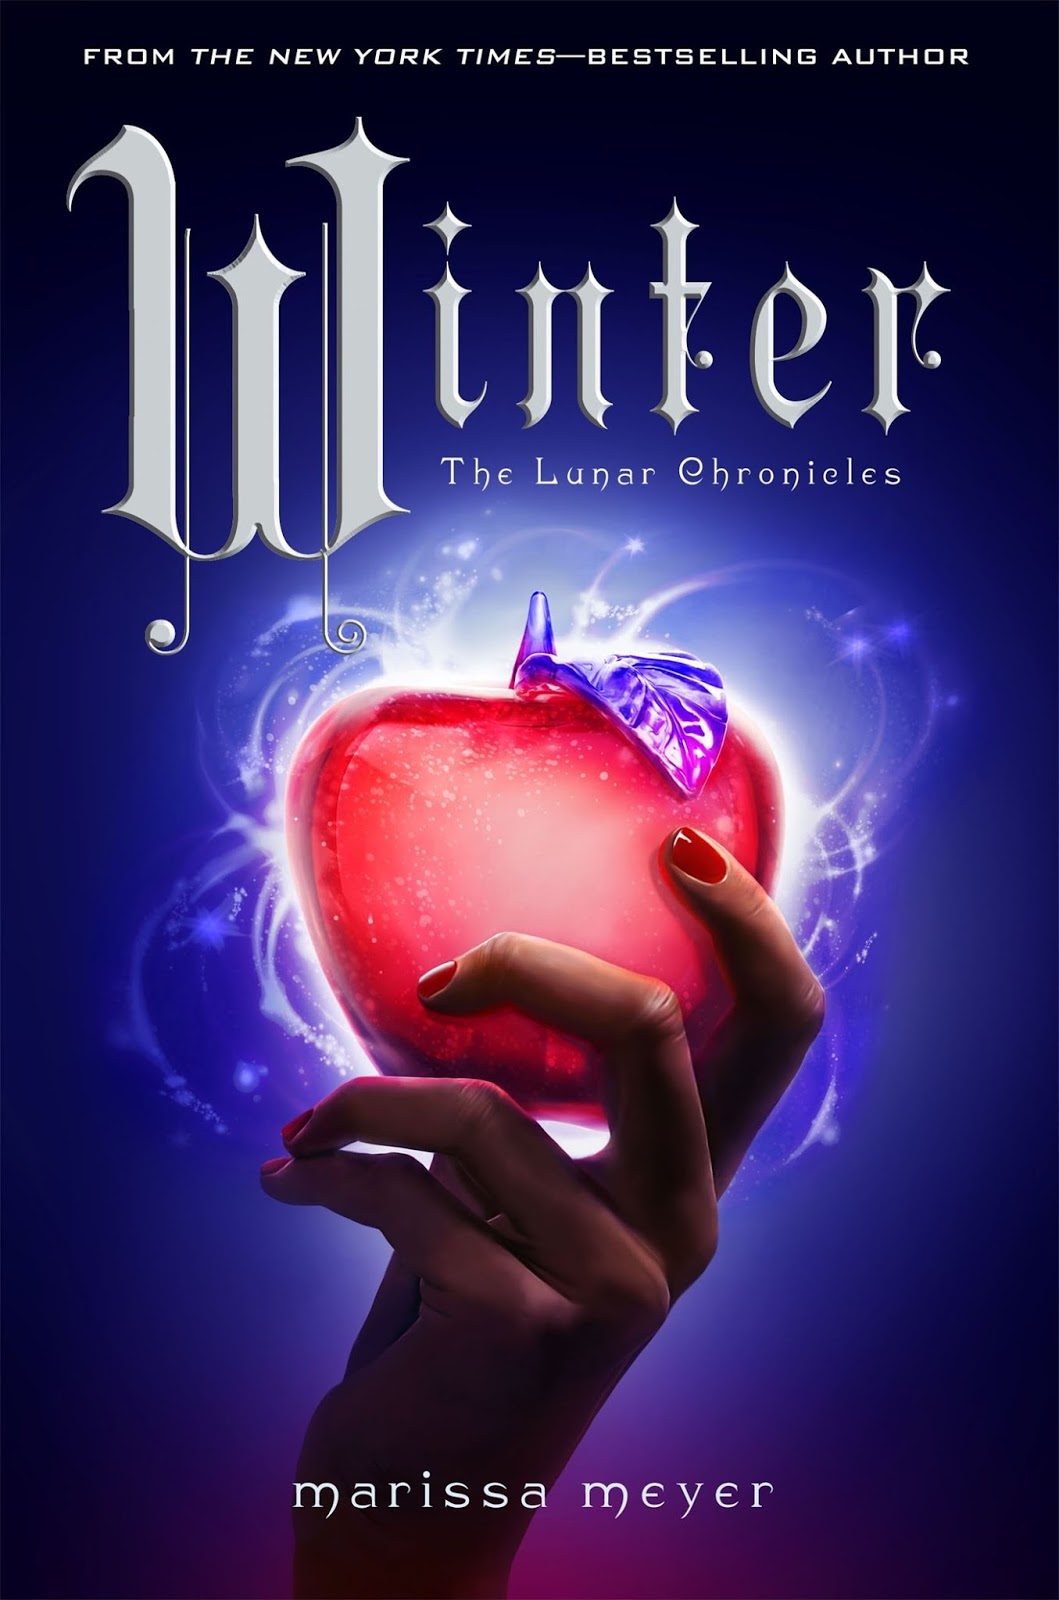 Carinas Books Review Winter By Marissa Meyer